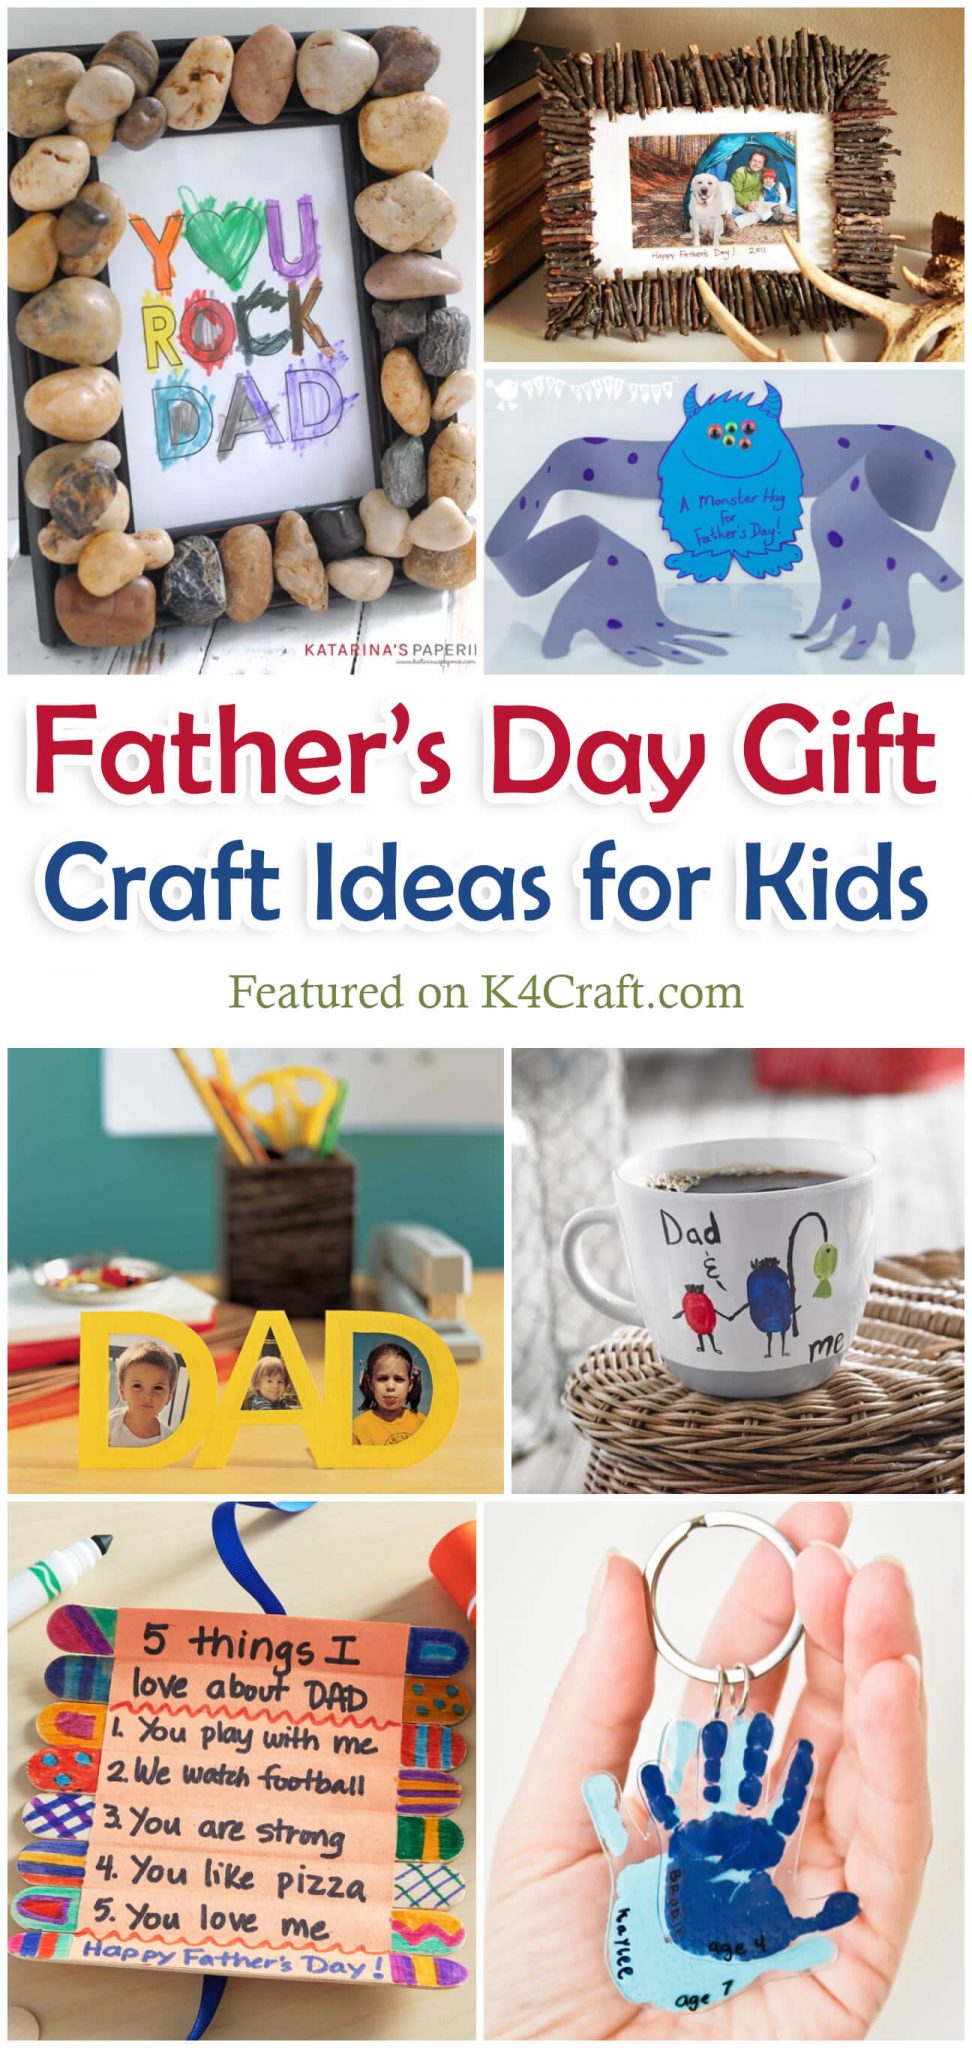 Unforgettable Father's Day Wood Crafts Gift Ideas